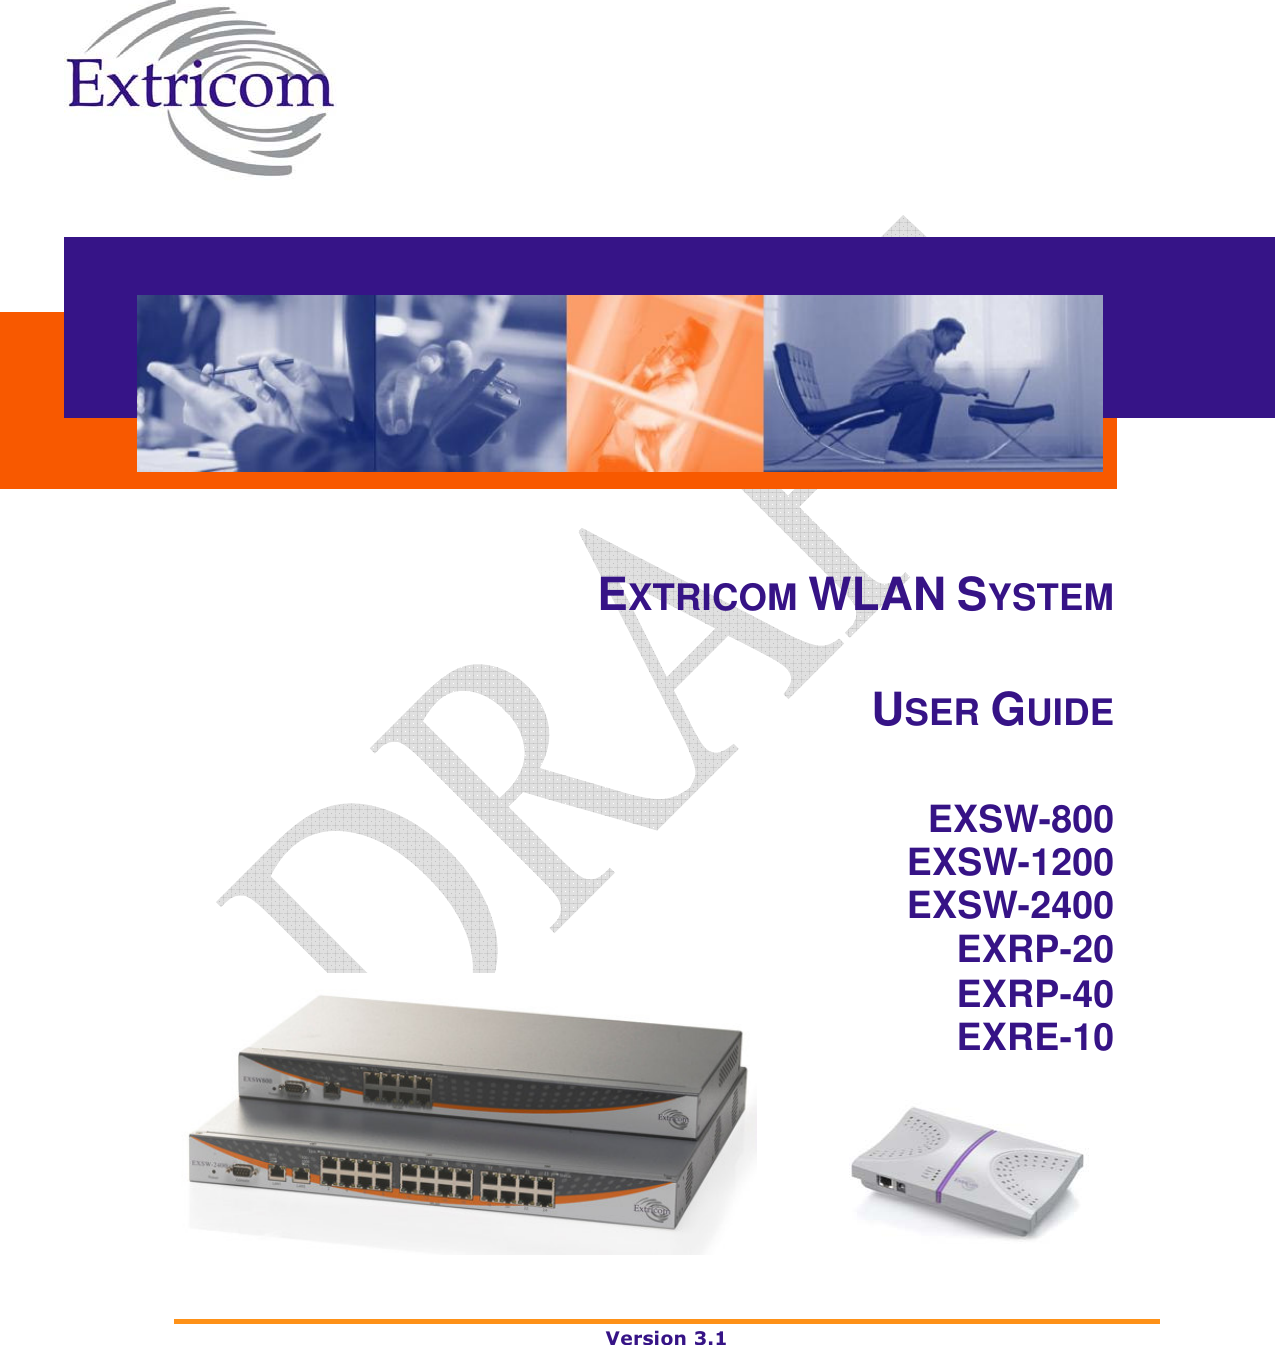  Version 3.1     EXTRICOM WLAN SYSTEM USER GUIDE EXSW-800 EXSW-1200 EXSW-2400 EXRP-20 EXRP-40 EXRE-10     